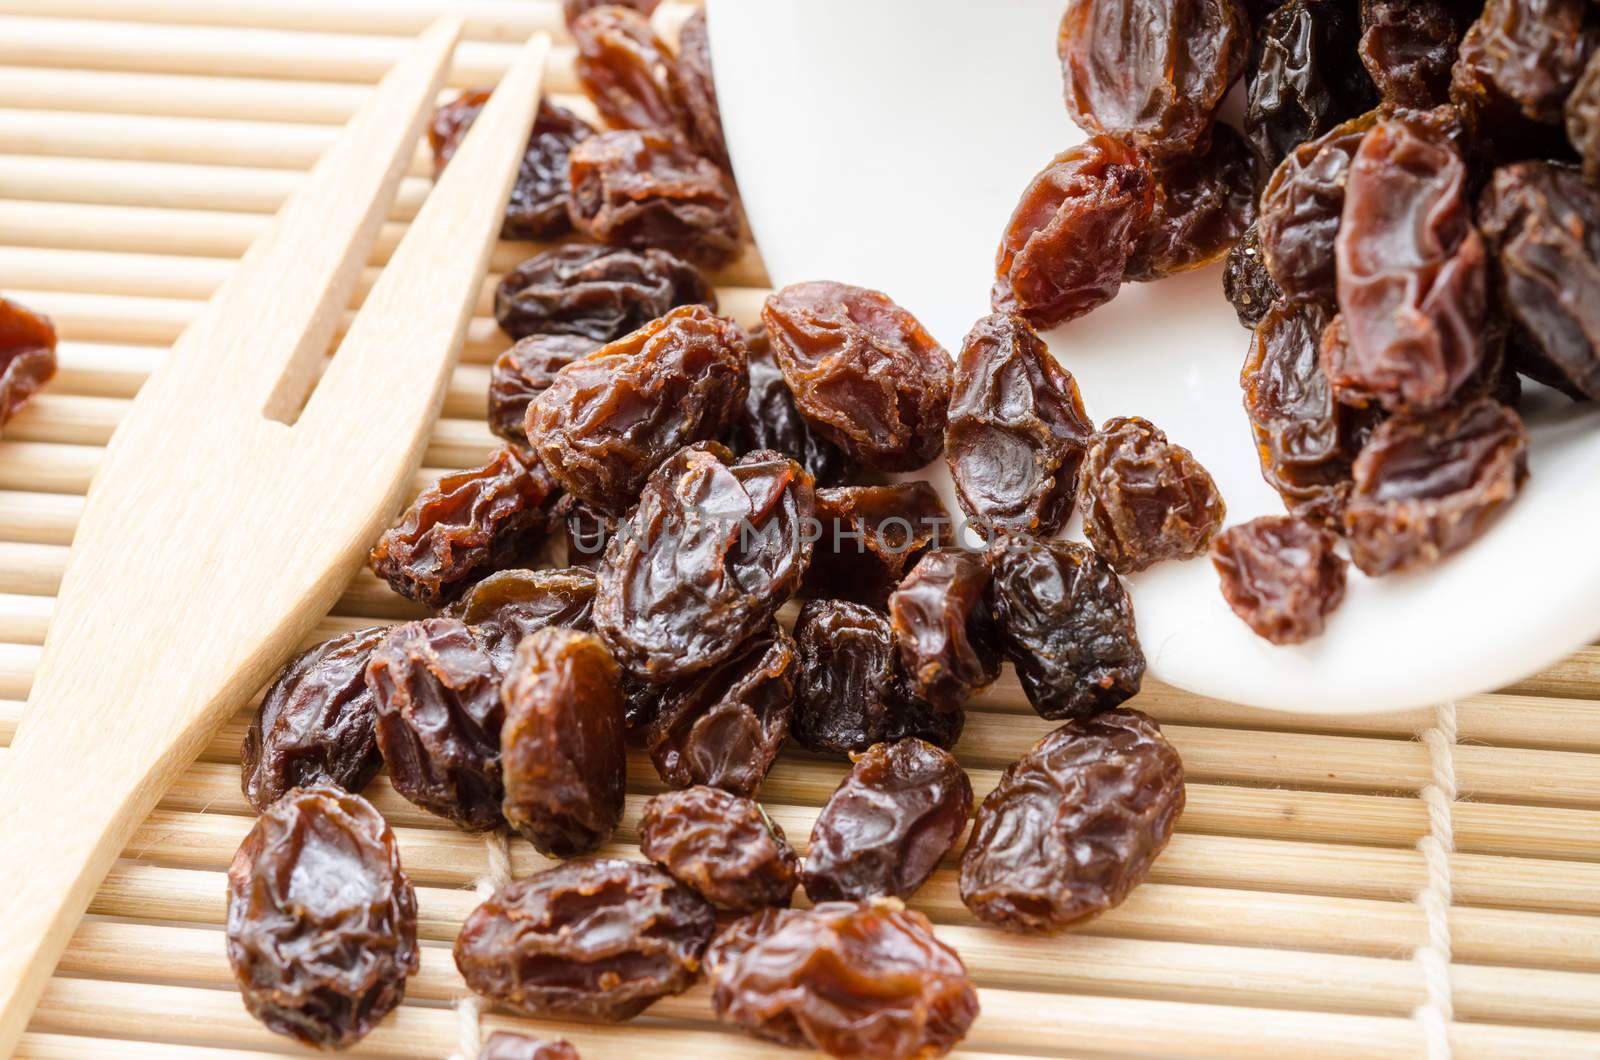 Raisin on white cup on wooden spoon fork on wooden mat background.